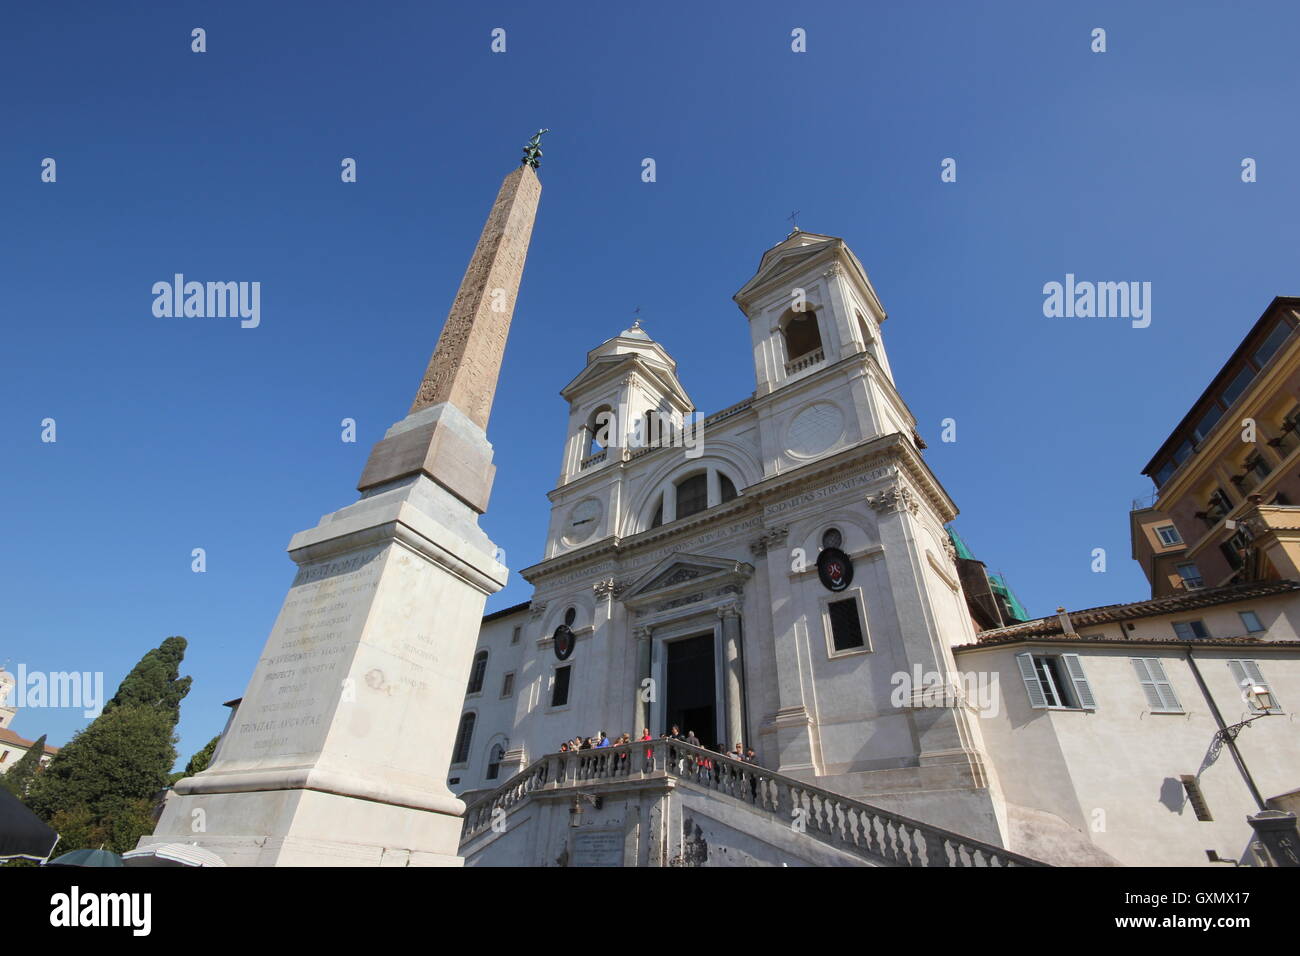 An extraordinary wide angle view of the obelisk & the Church of Trinità dei Monti, with a clear blue sky, tourists, Roma, Rome Stock Photo